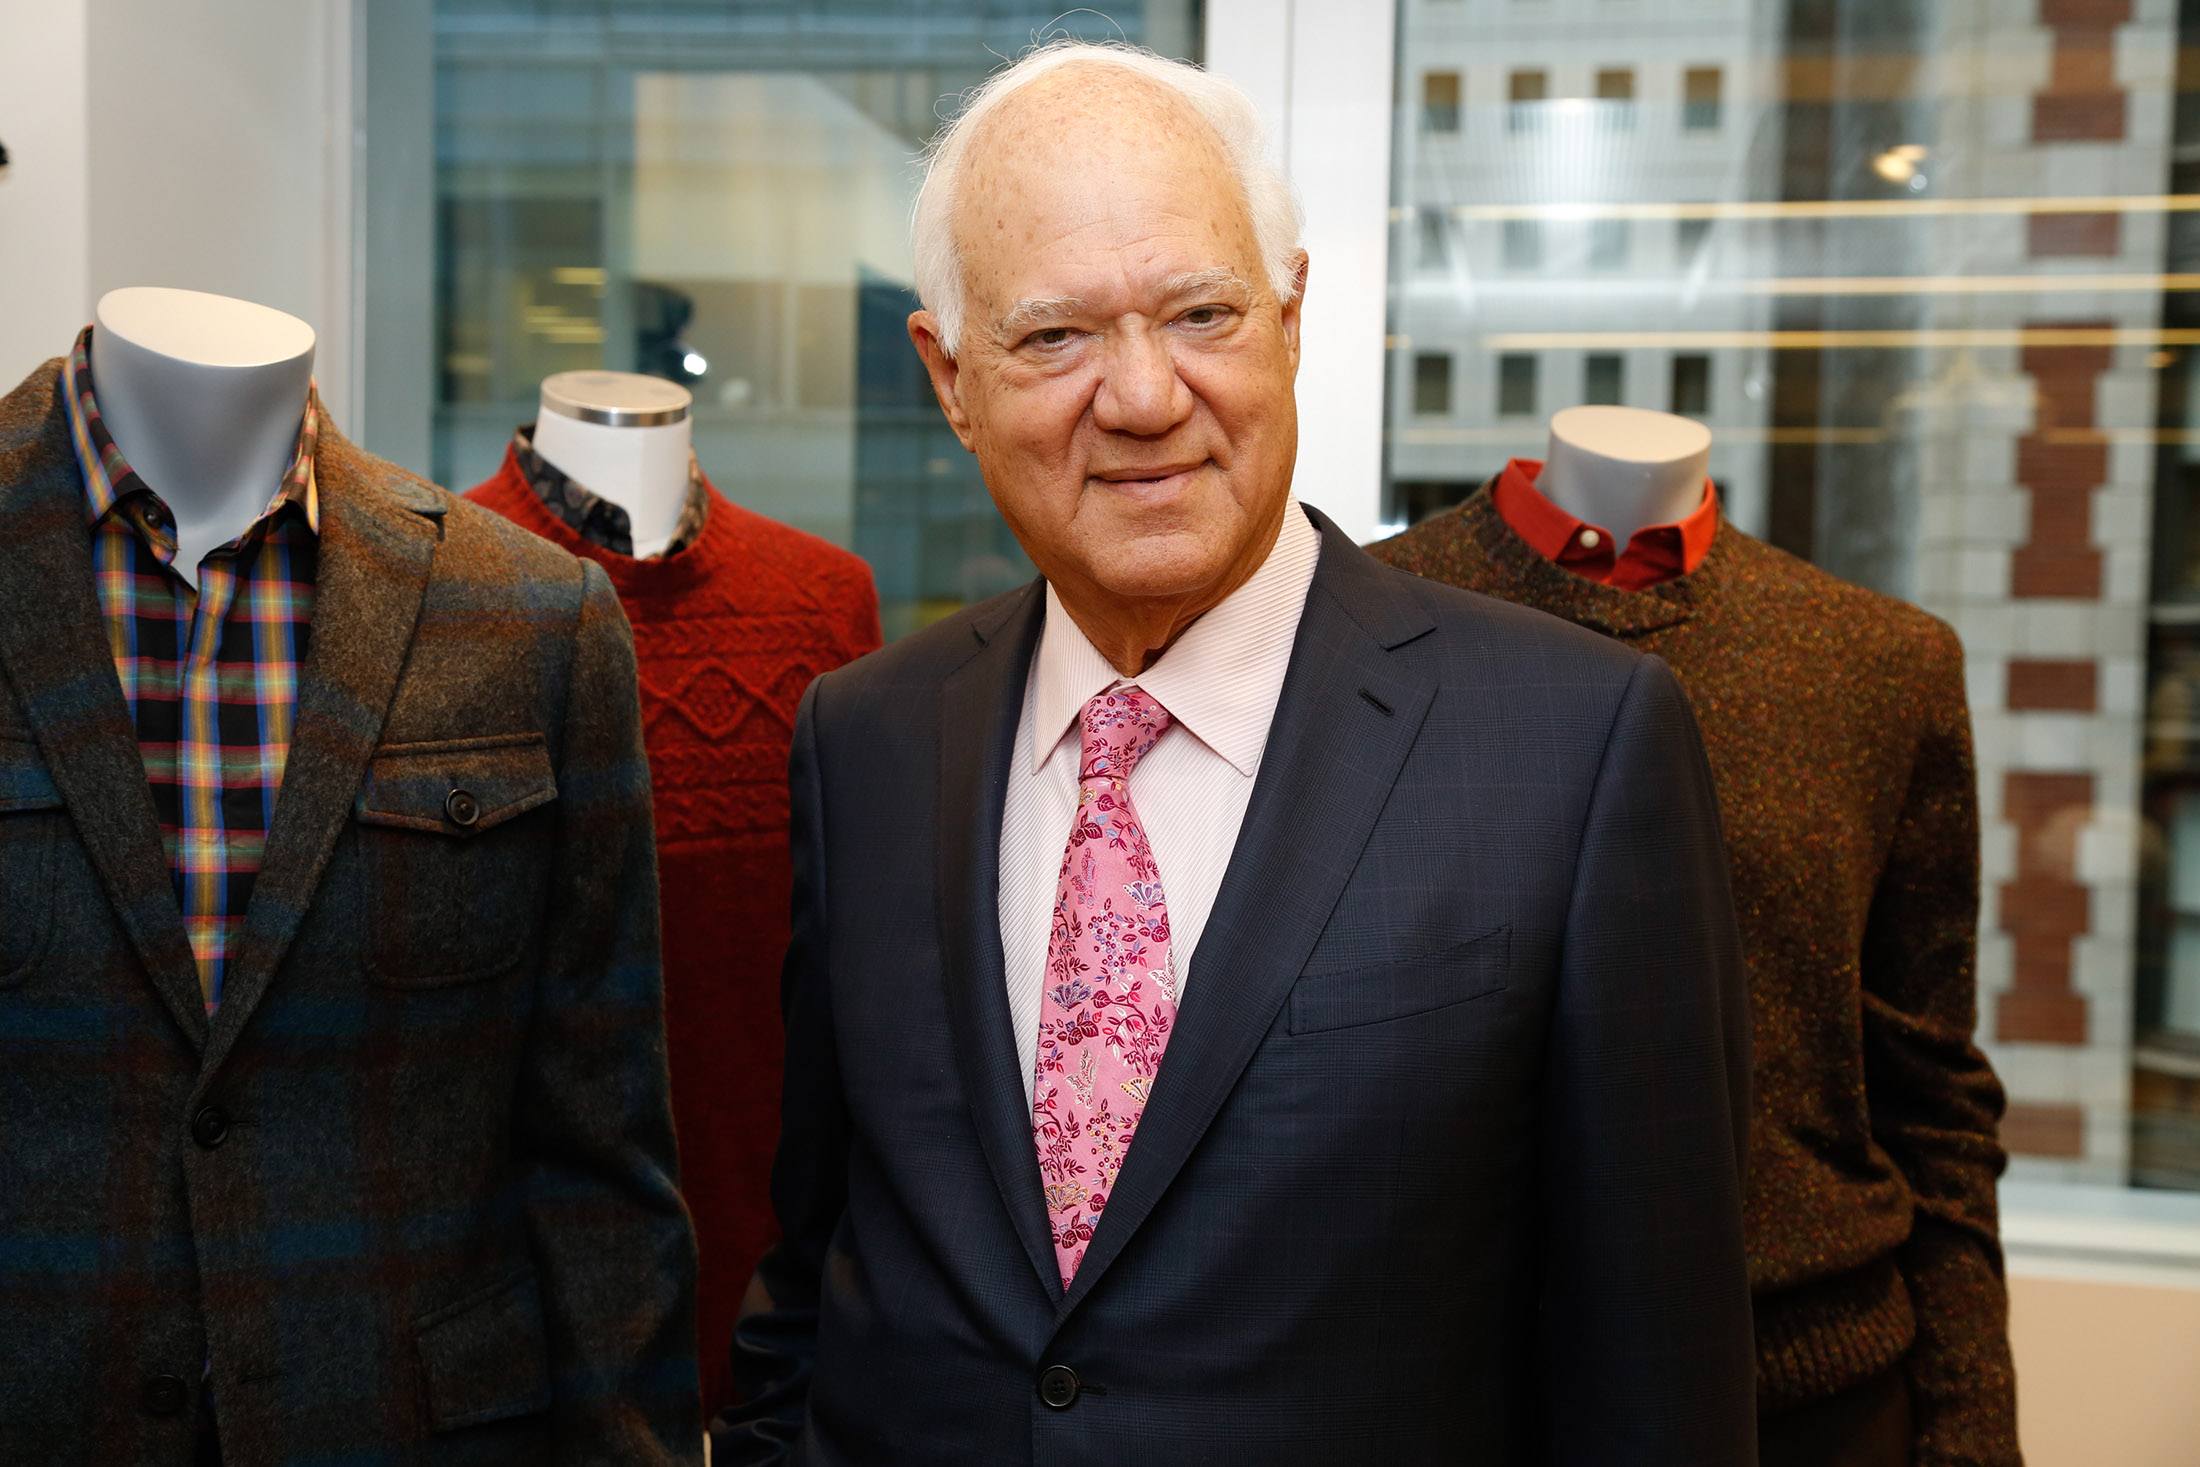 Perry Ellis goes private via acquisition led by founder